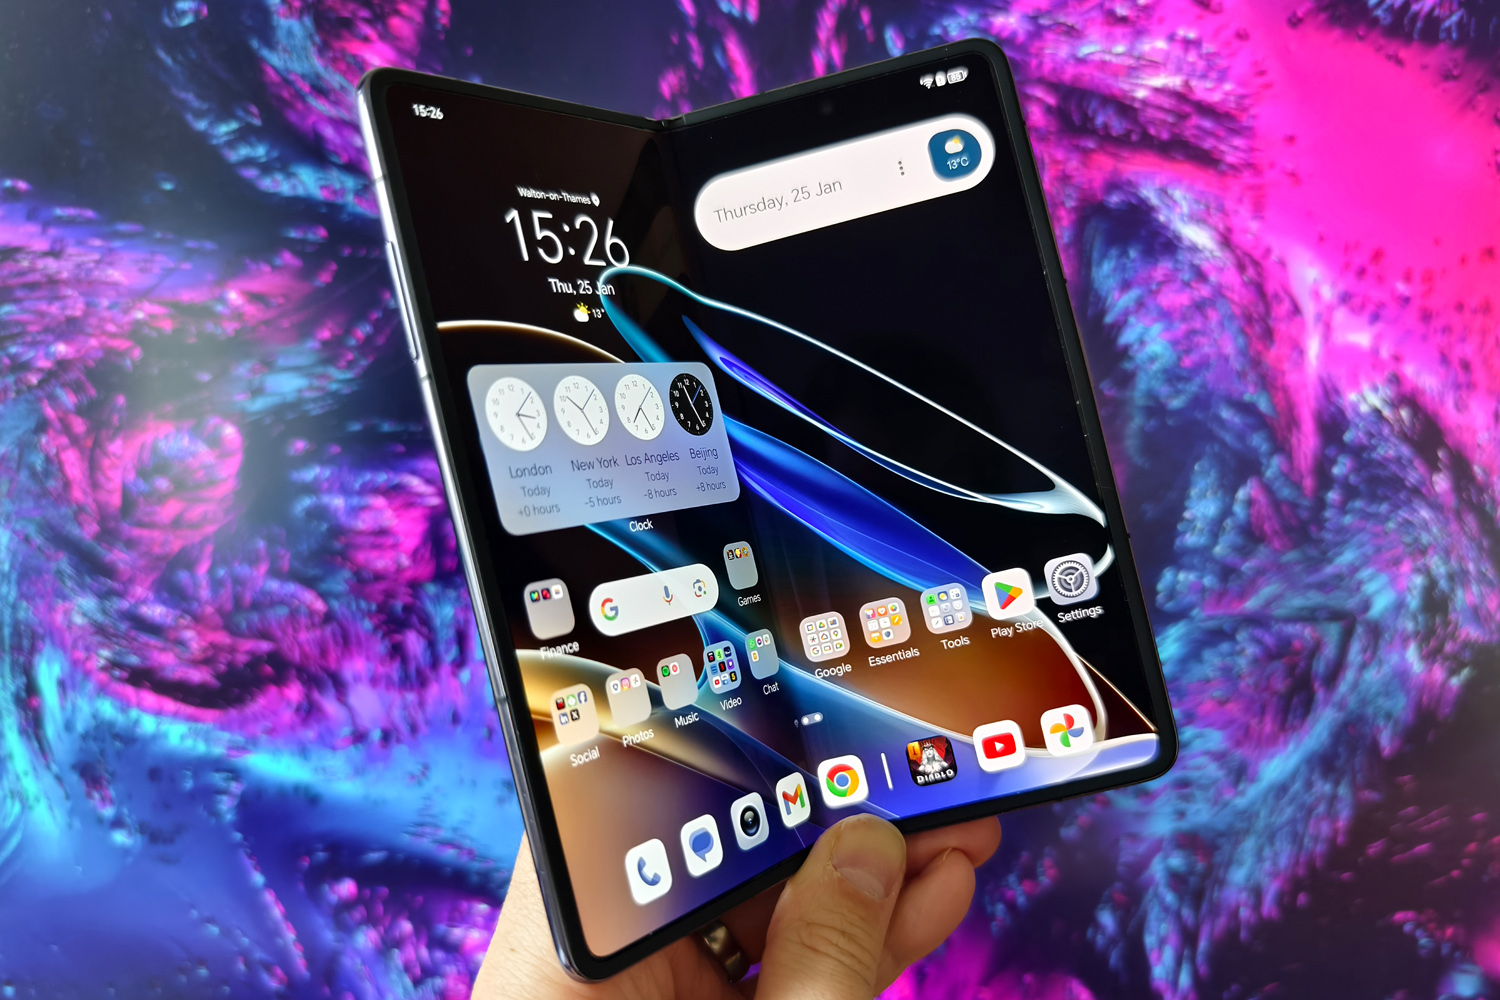 Honor made a foldable that's lighter than the iPhone 14 Pro Max